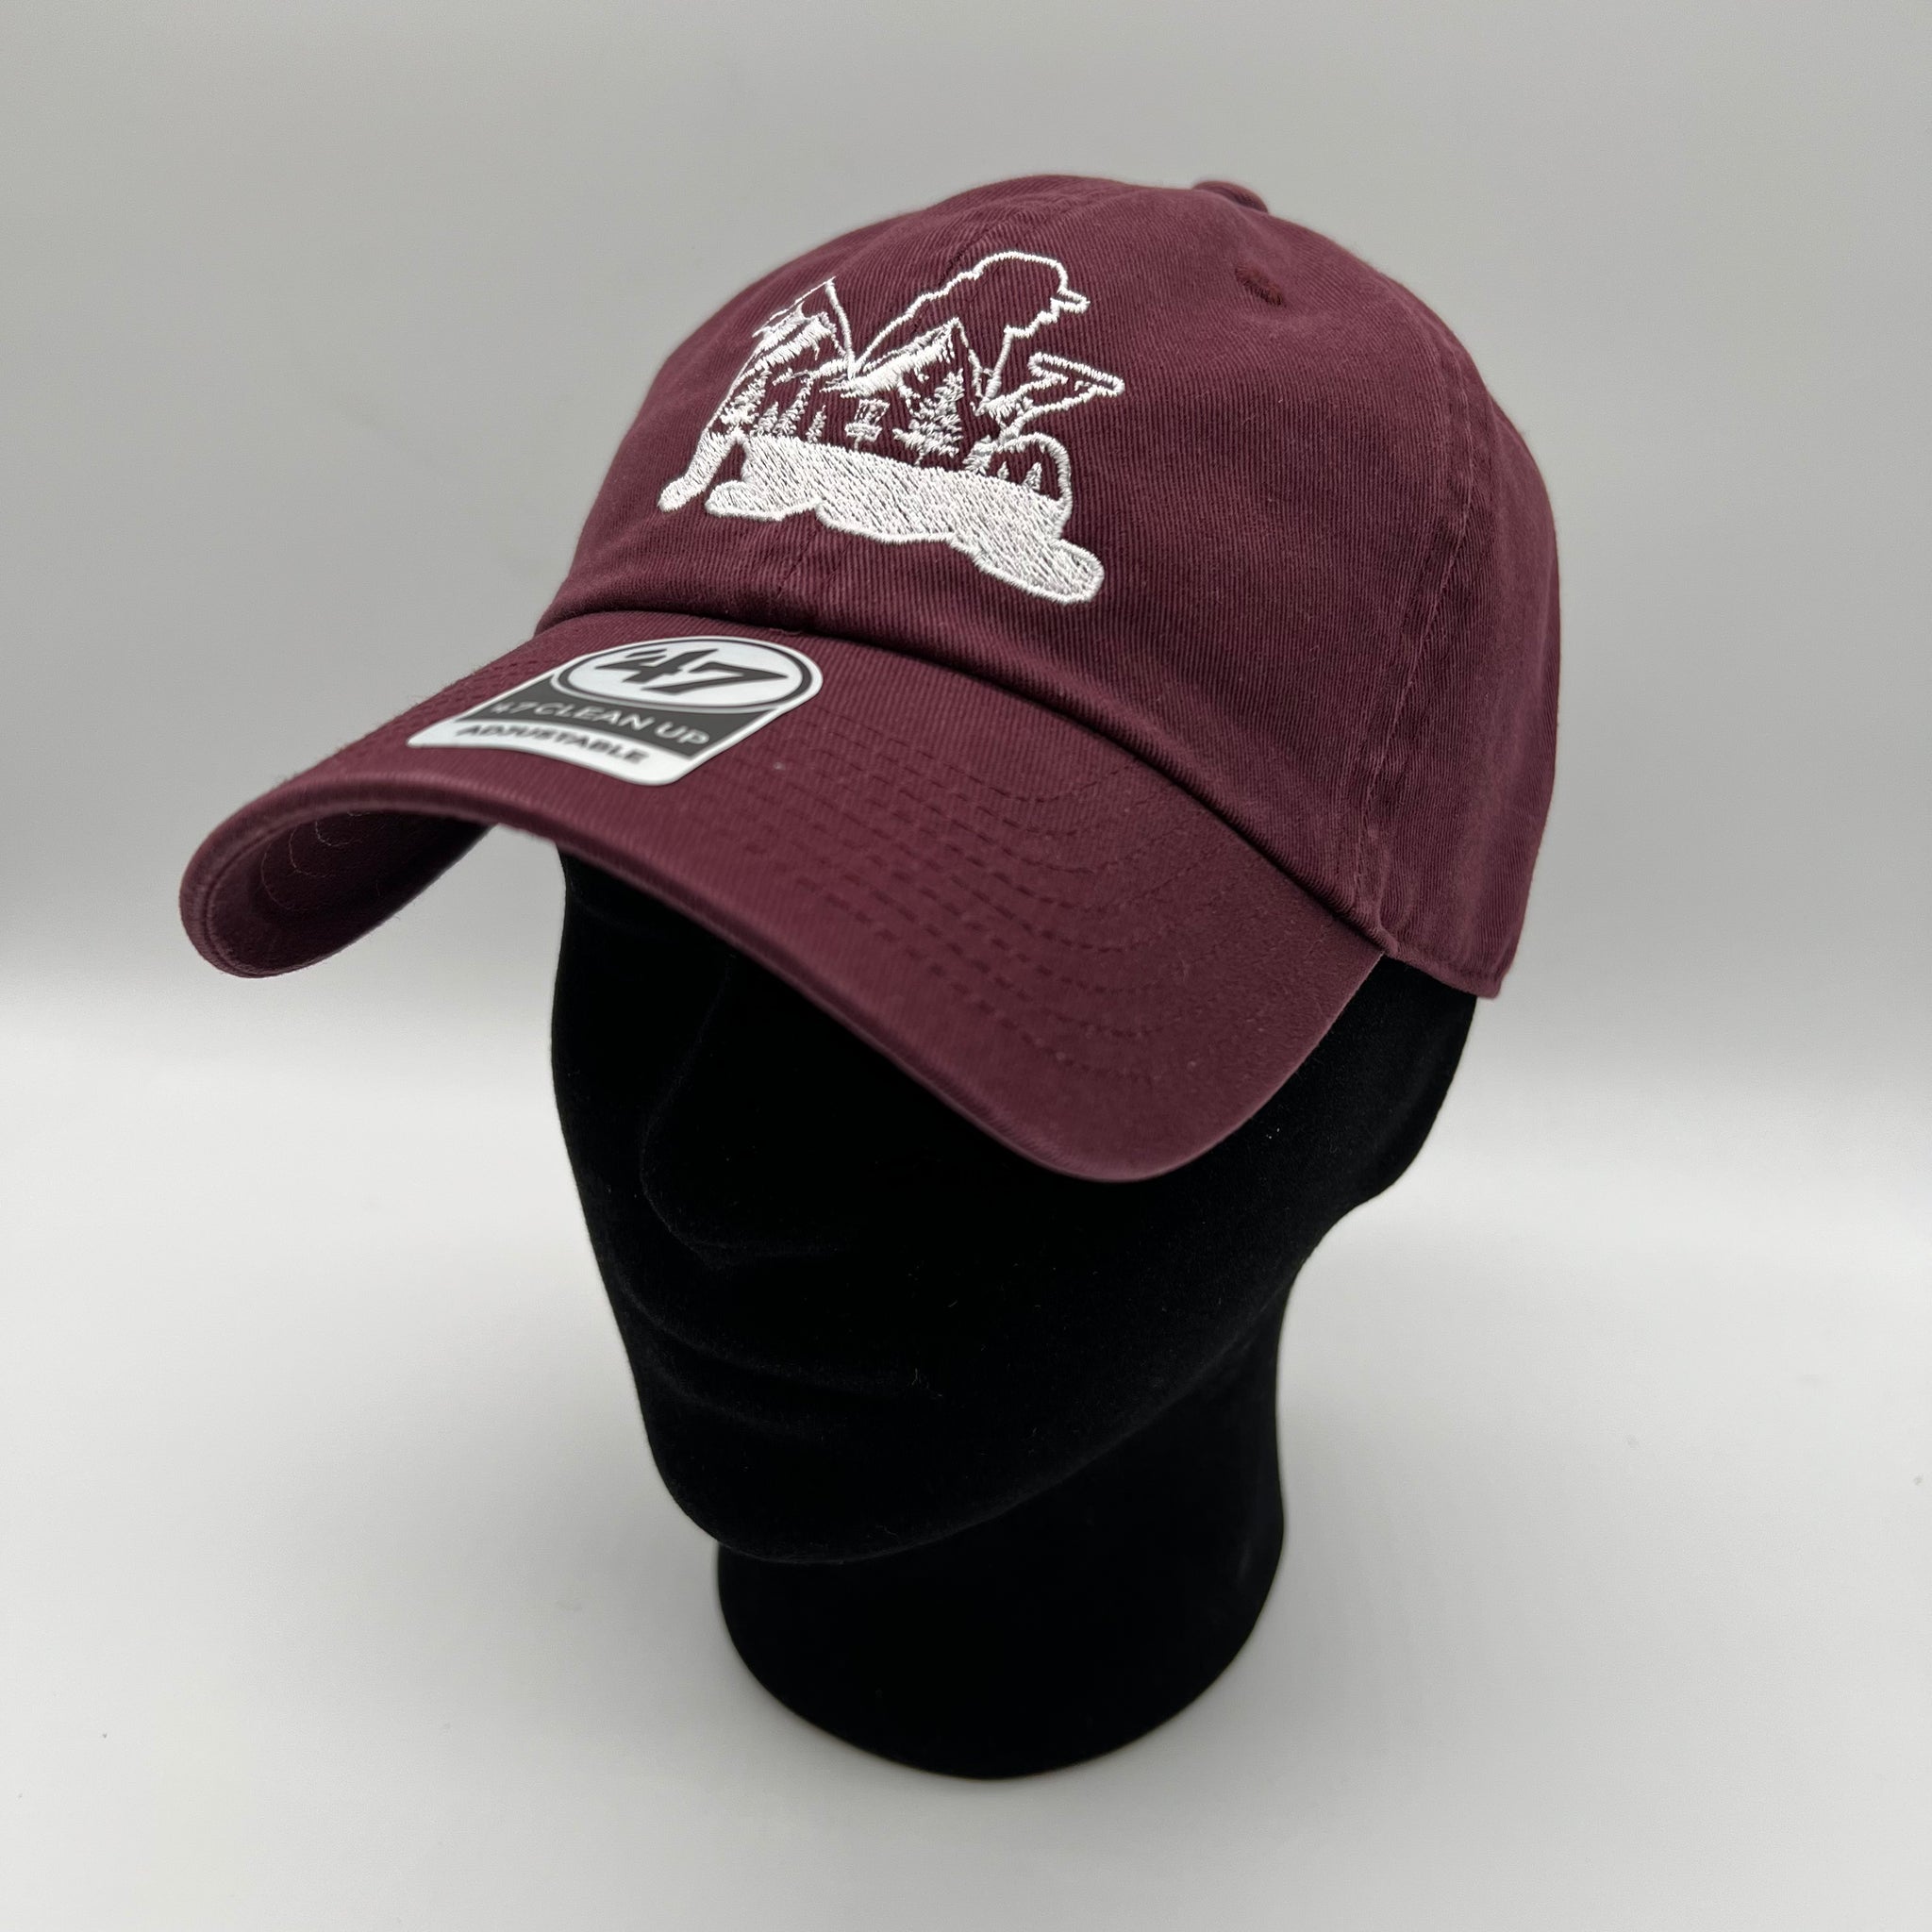 Good Boy Classic Unstructured Hat